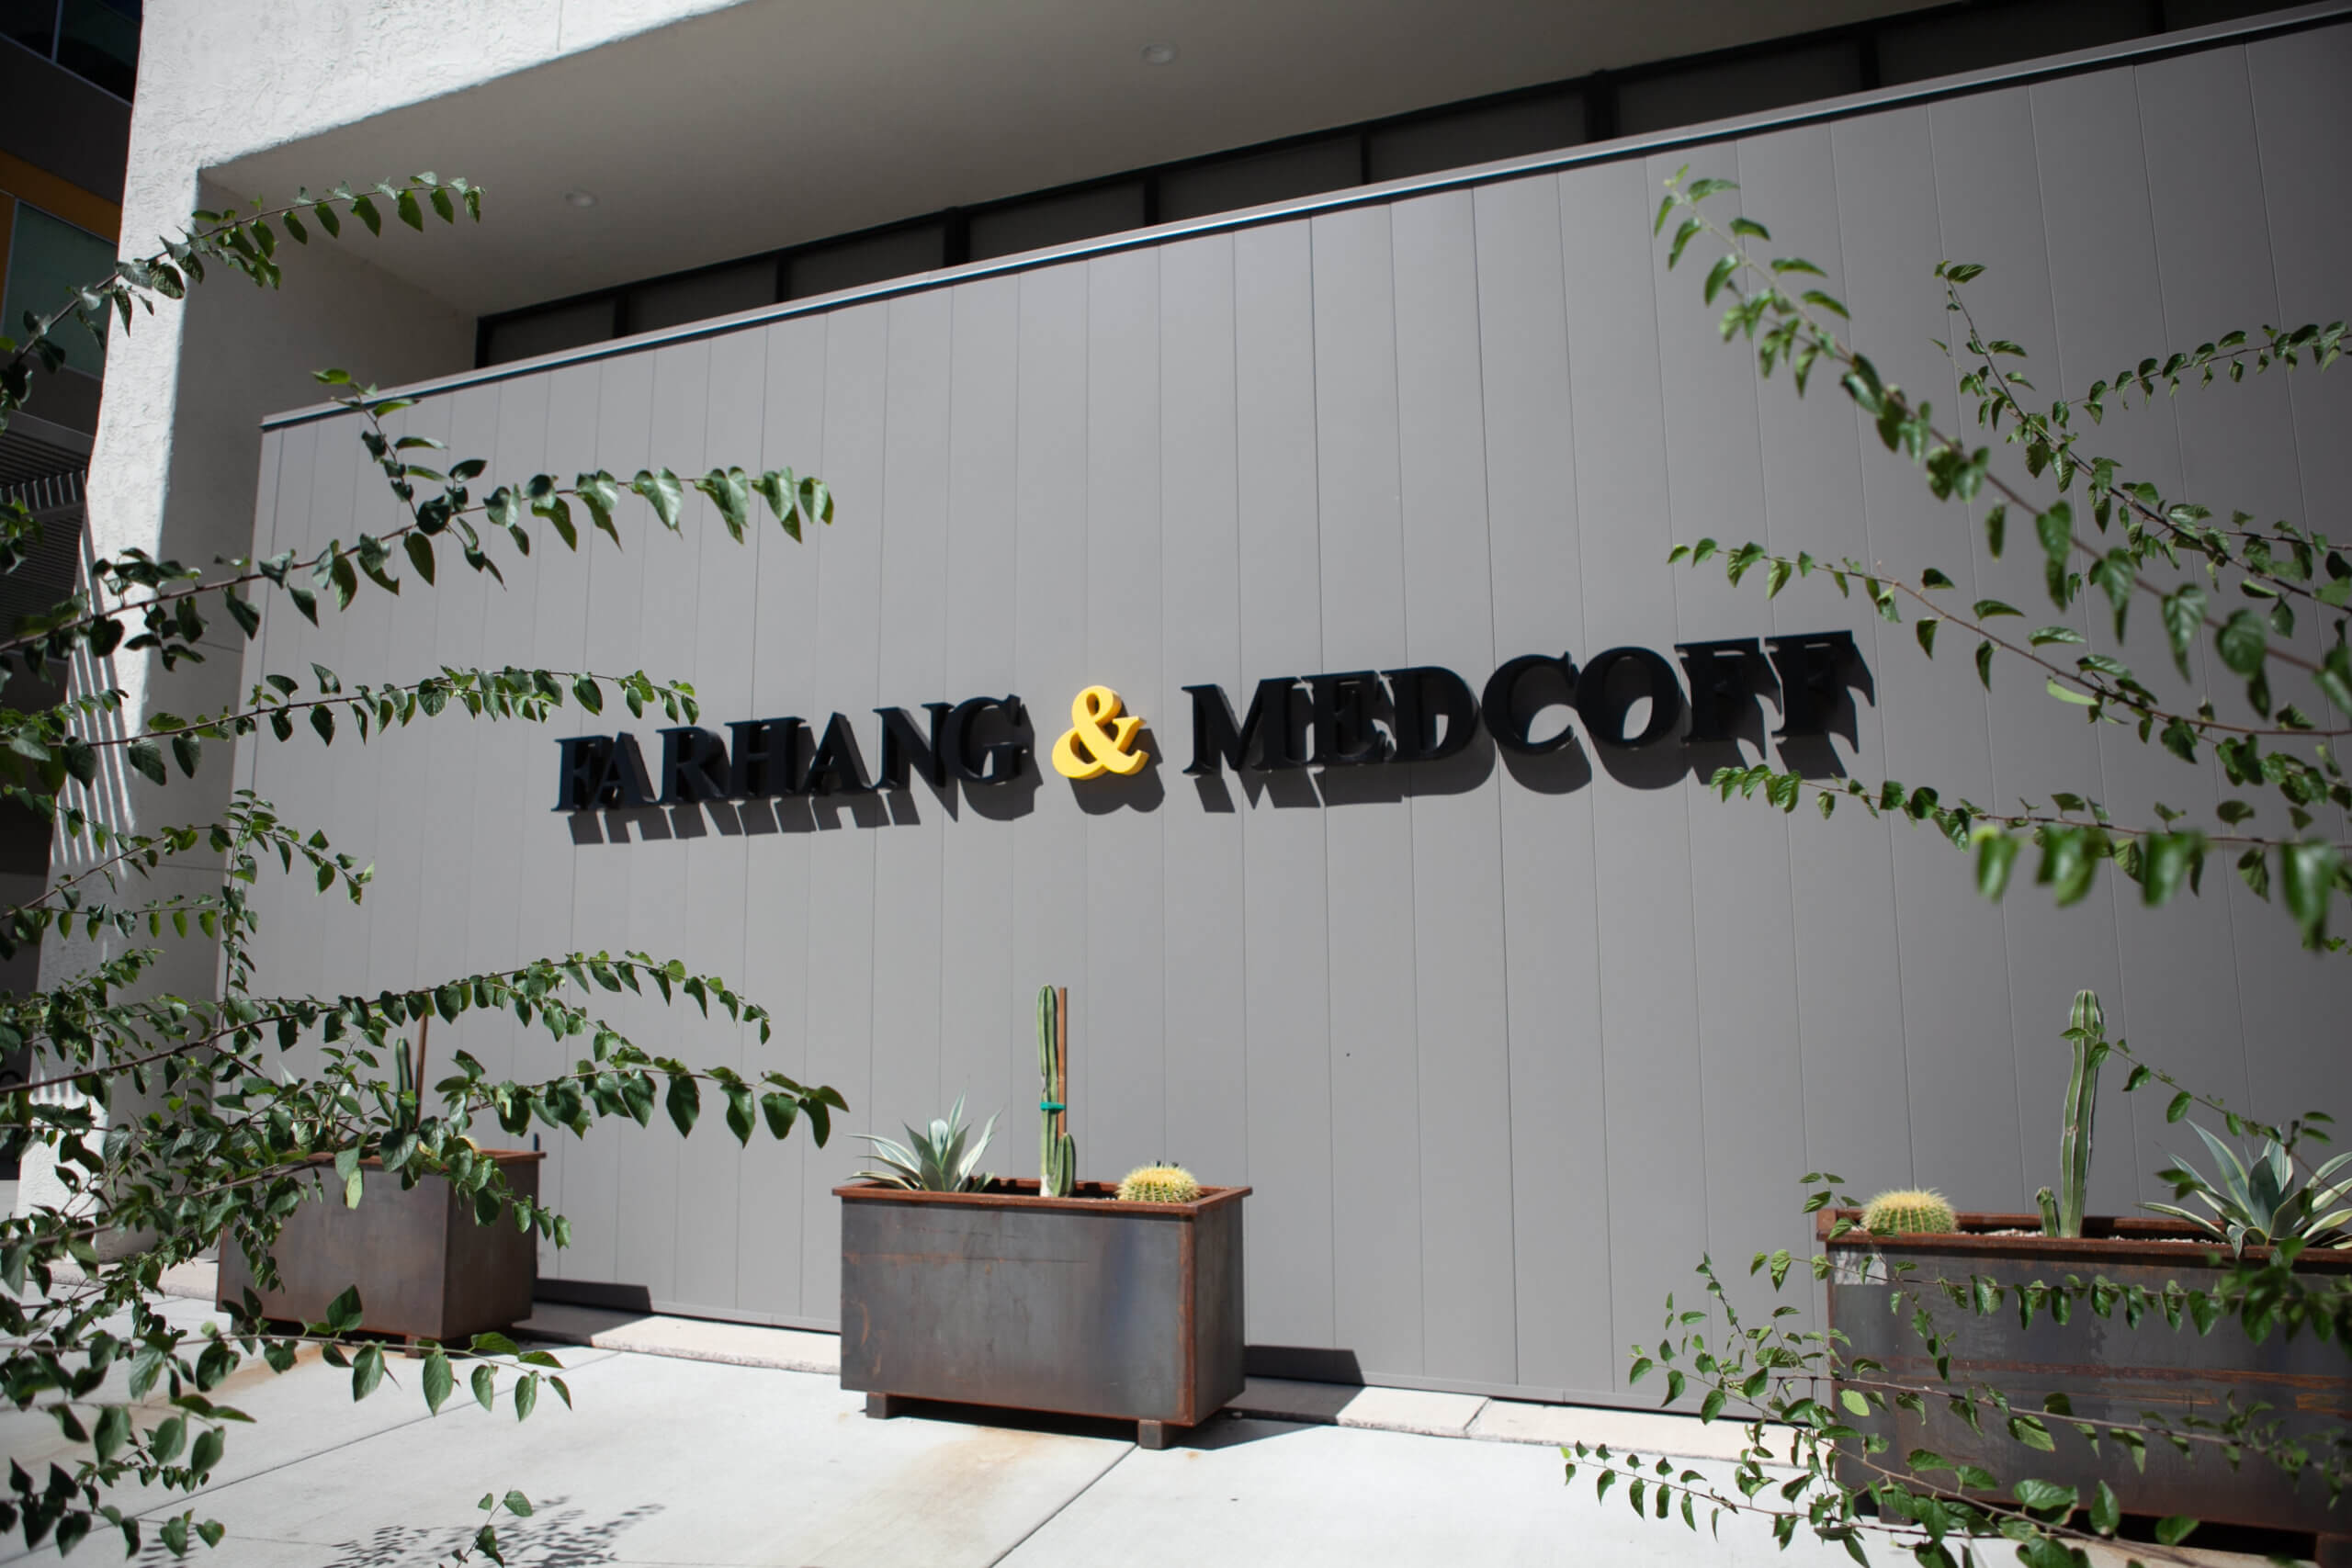 Exterior of a building with a sign reading "Farhang and Medcoff" with three planter boxes containing cactuses